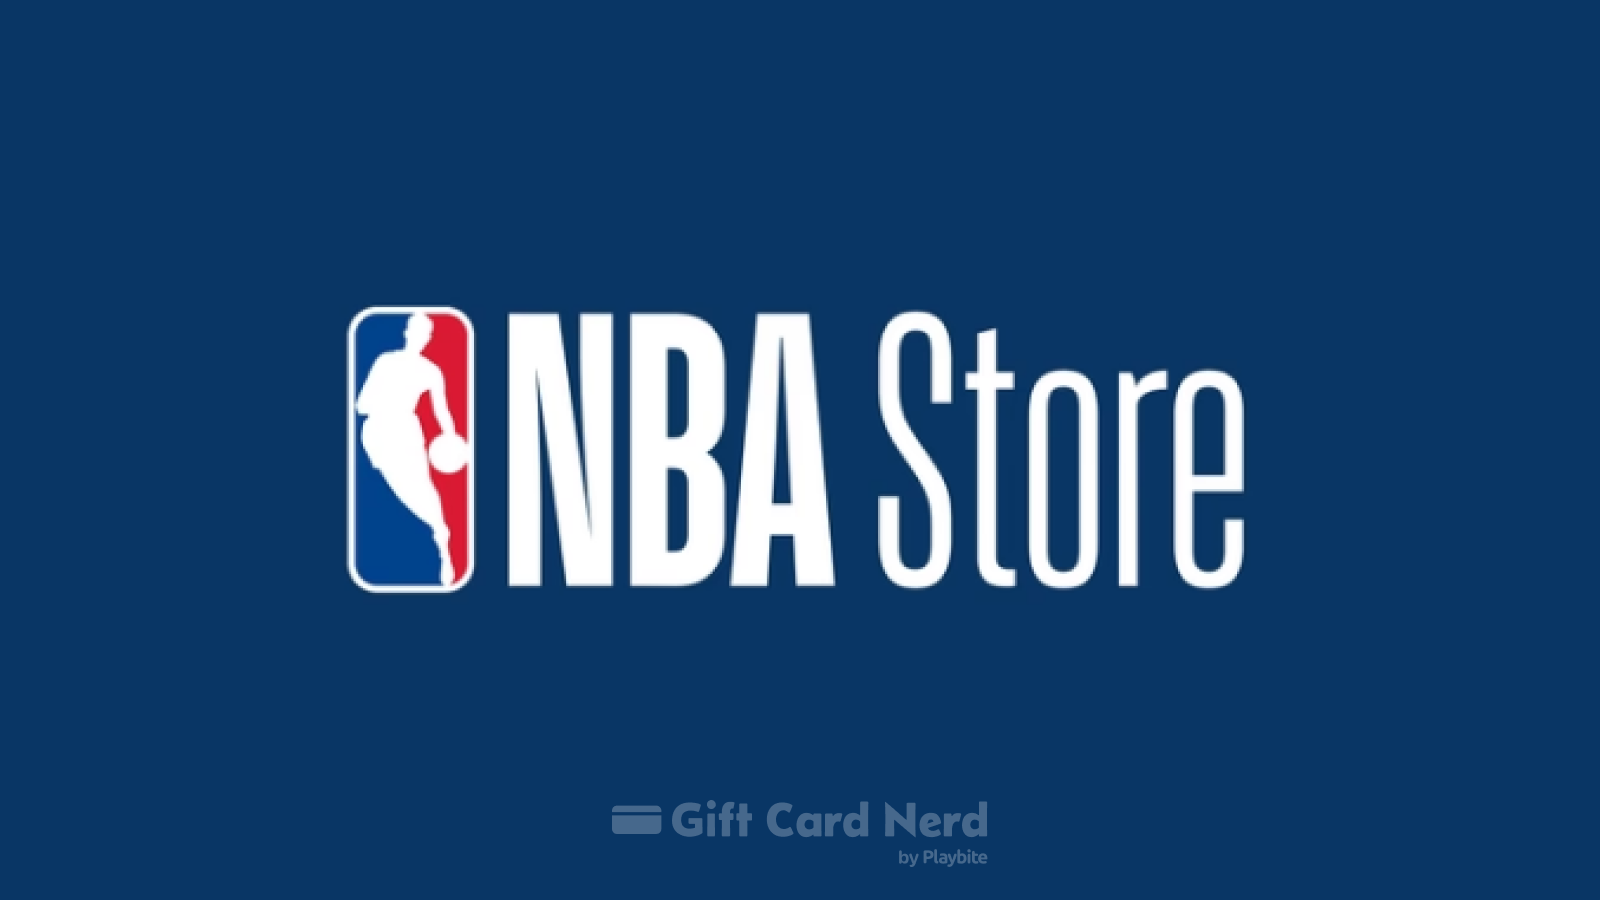 Can You Buy NBA Store Gift Cards at CVS?